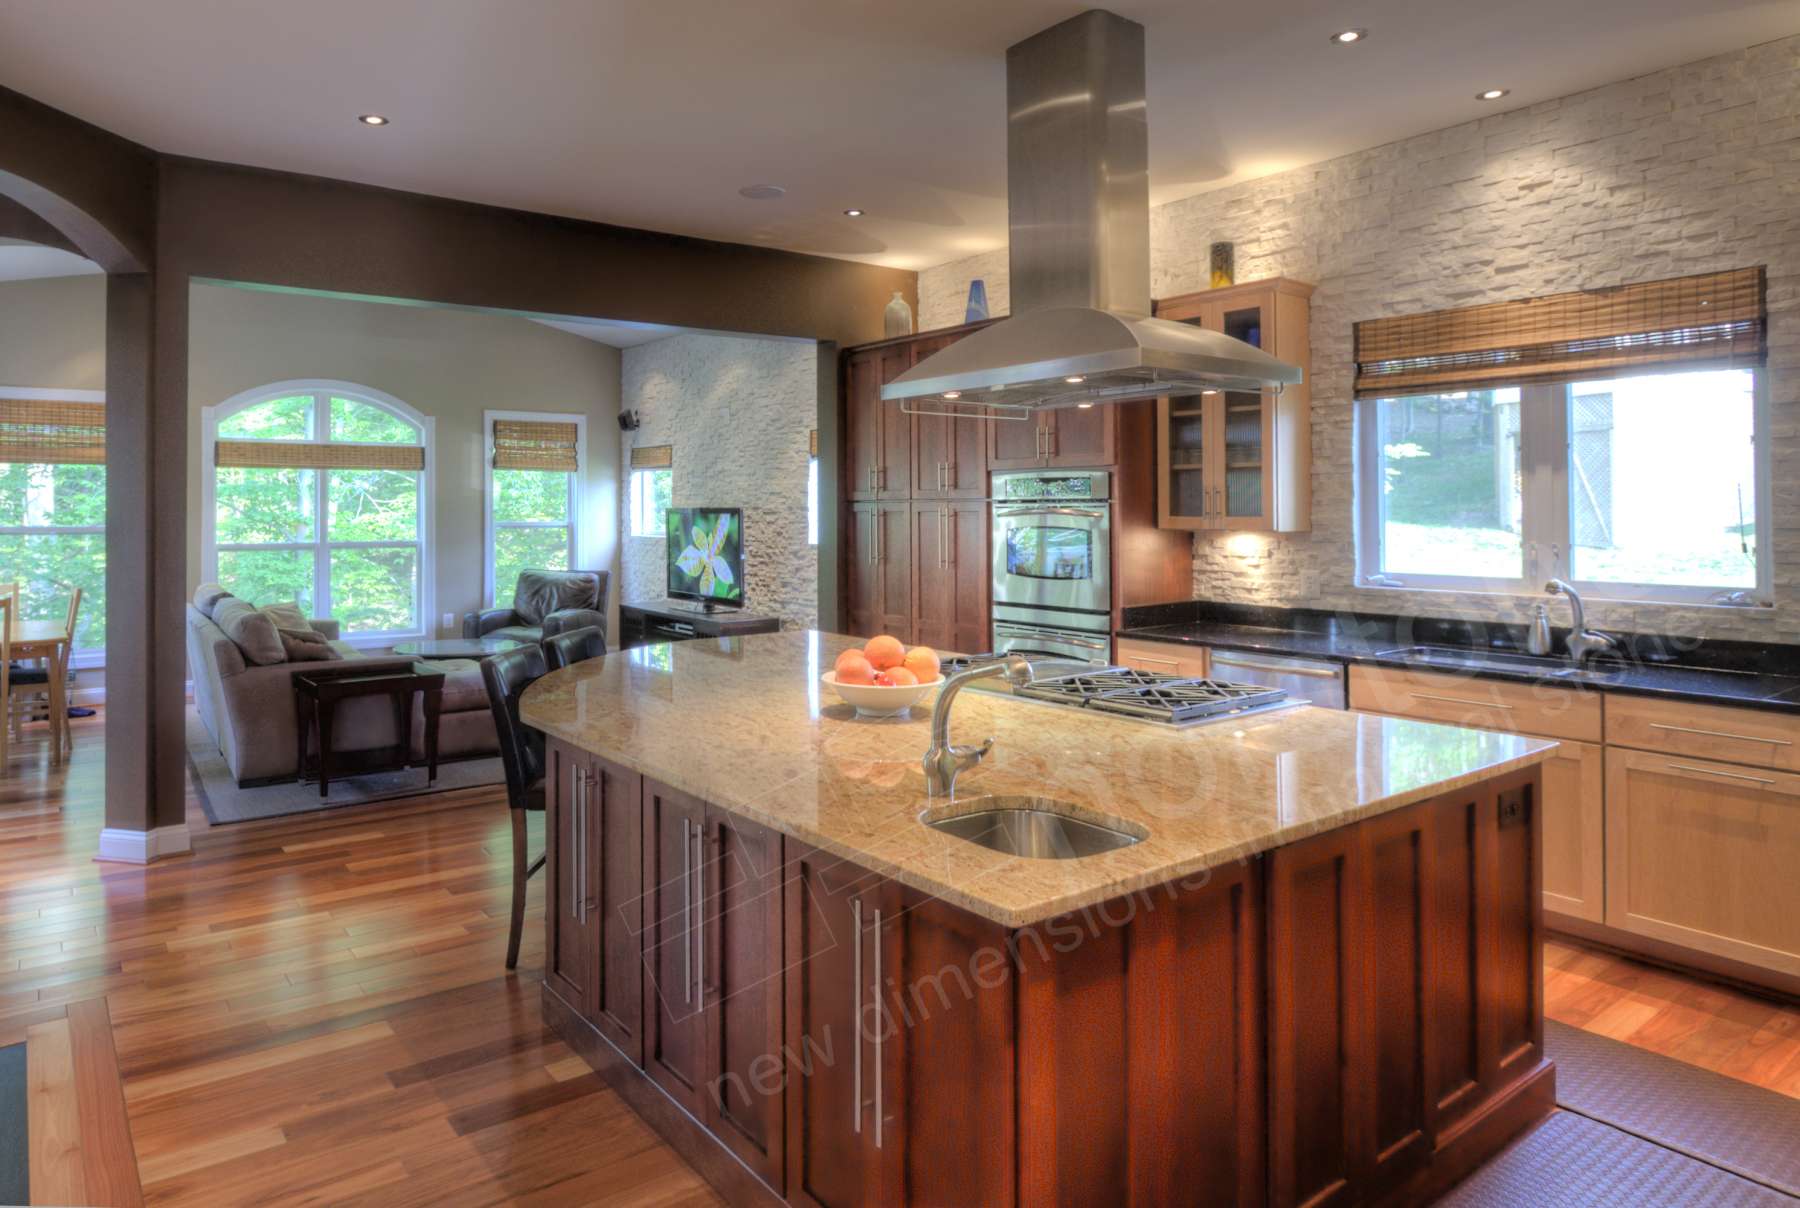 Countertop to ceiling white stacked stone backsplash in a remodeled kitchen with large island